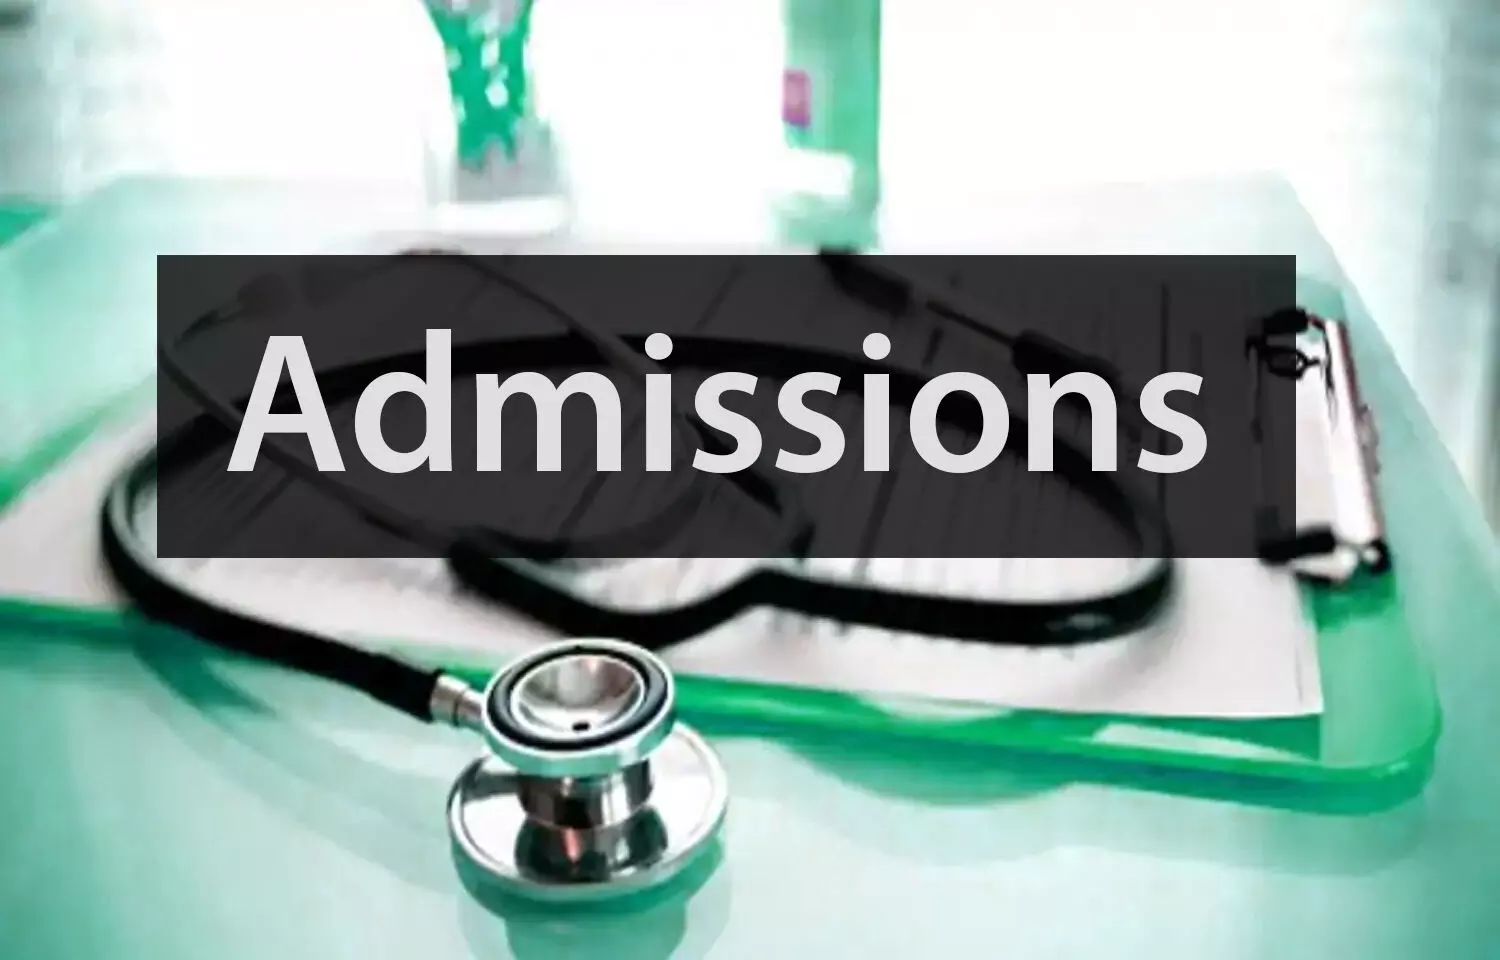 BSc, Post Basic, MSc Nursing admissions 2021: BFUHS to conduct walk in counselling on March 30, Details